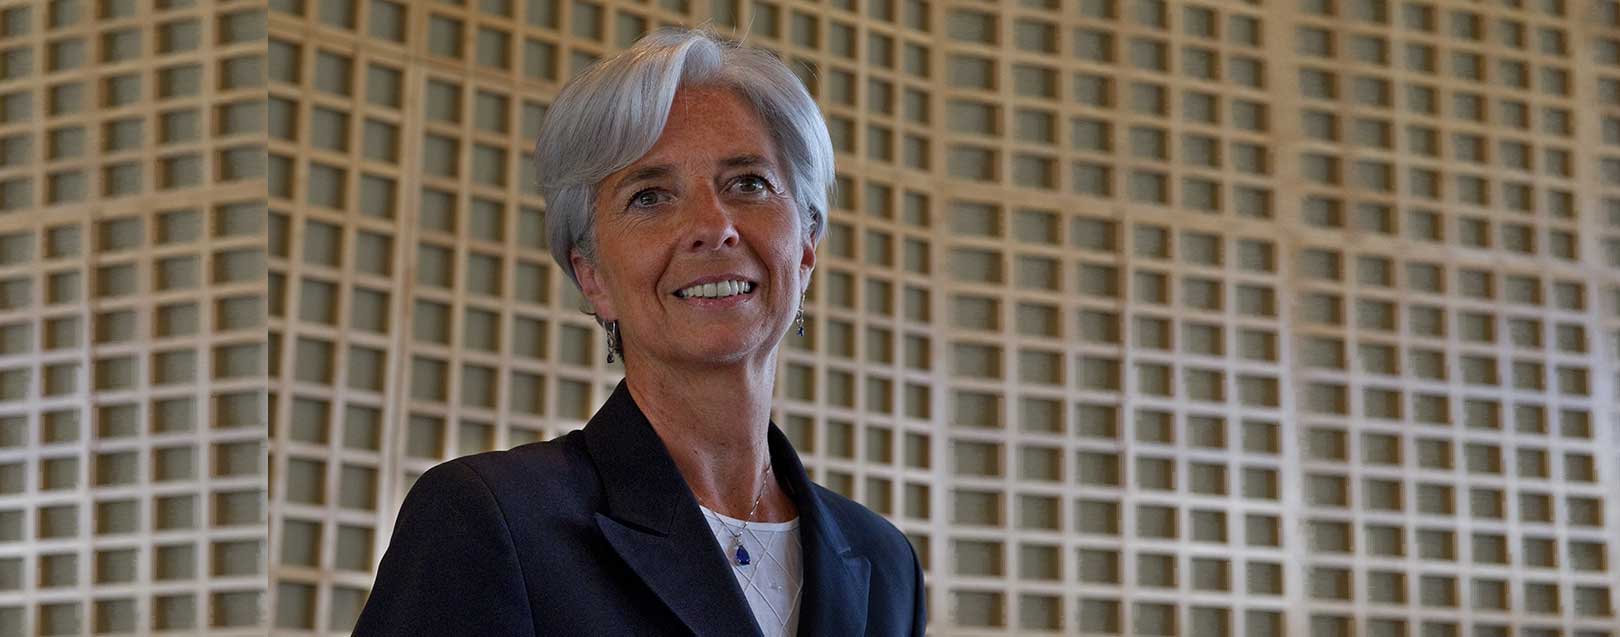 IMF Chief impressed with GST and bankruptcy code reforms